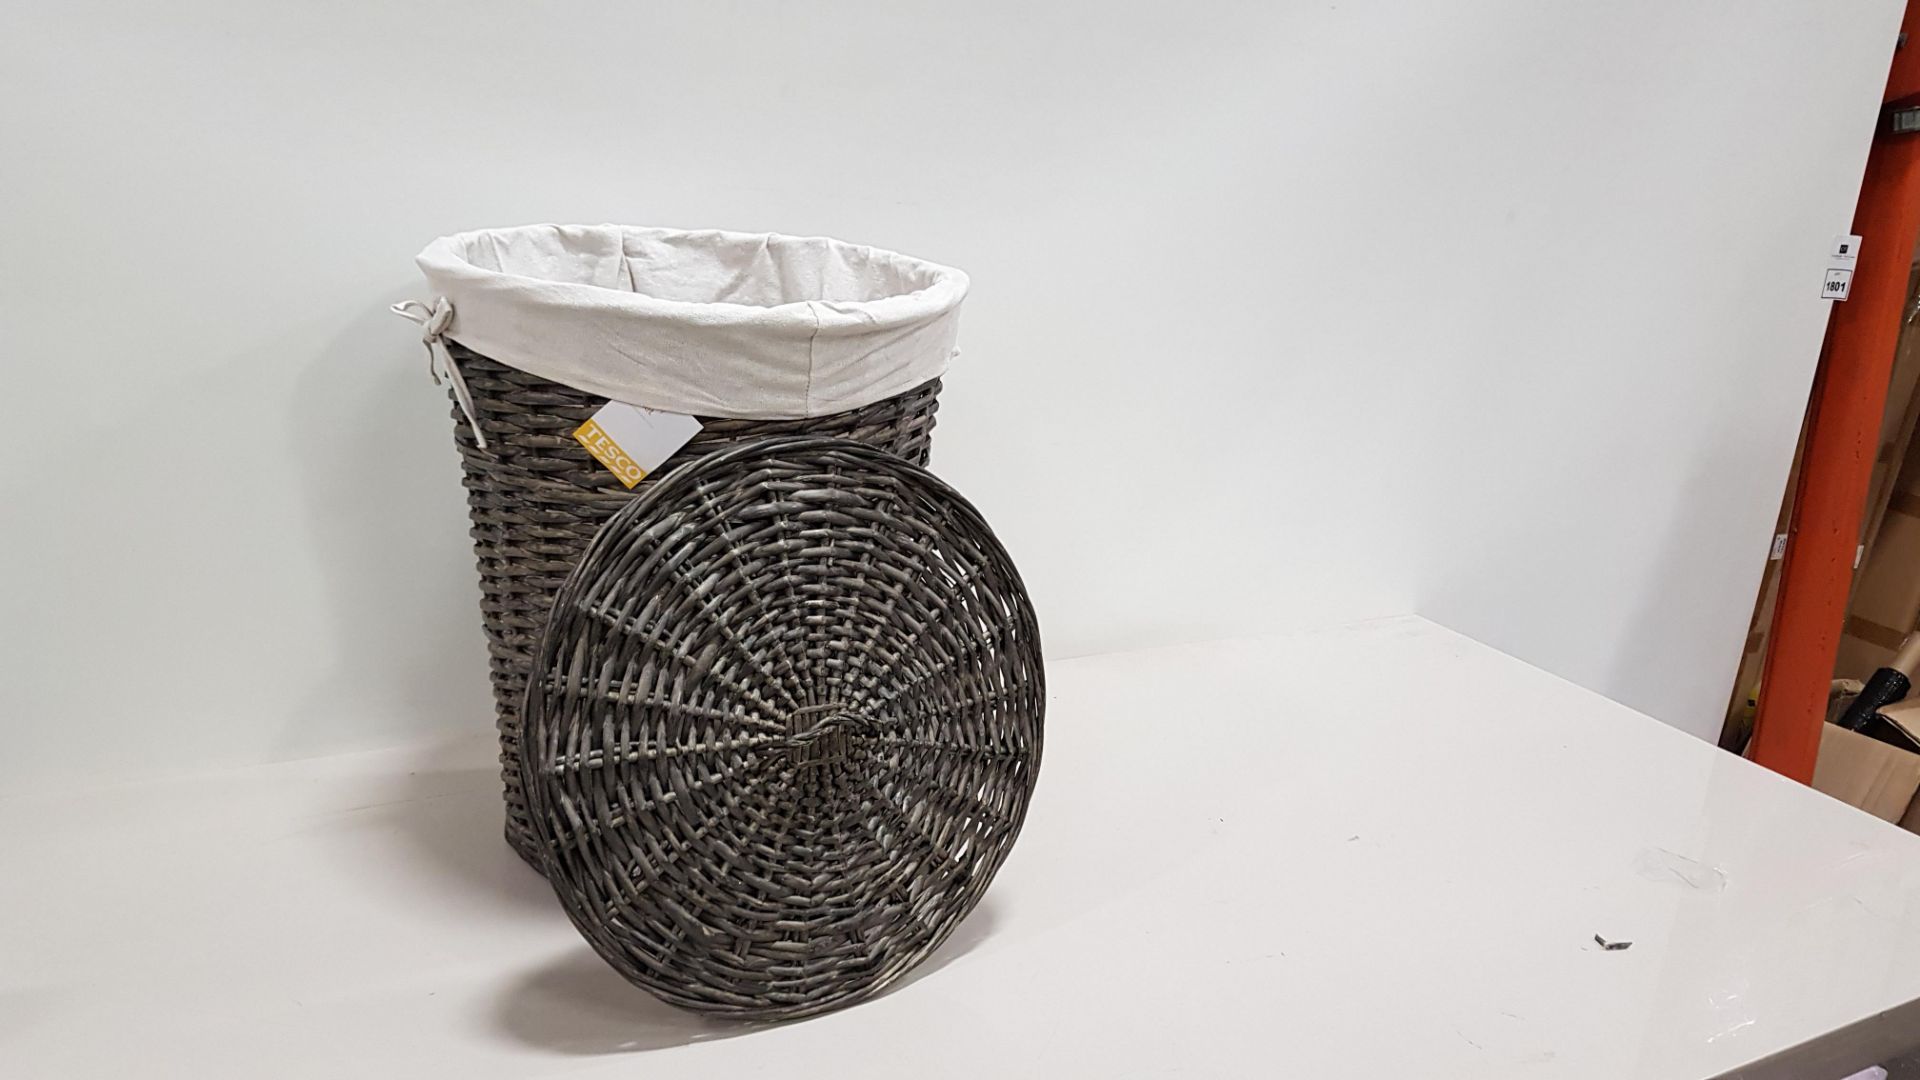 10 X BRAND NEW WILLOW LAUNDRY BASKETS IN GREY IN 5 BOXES